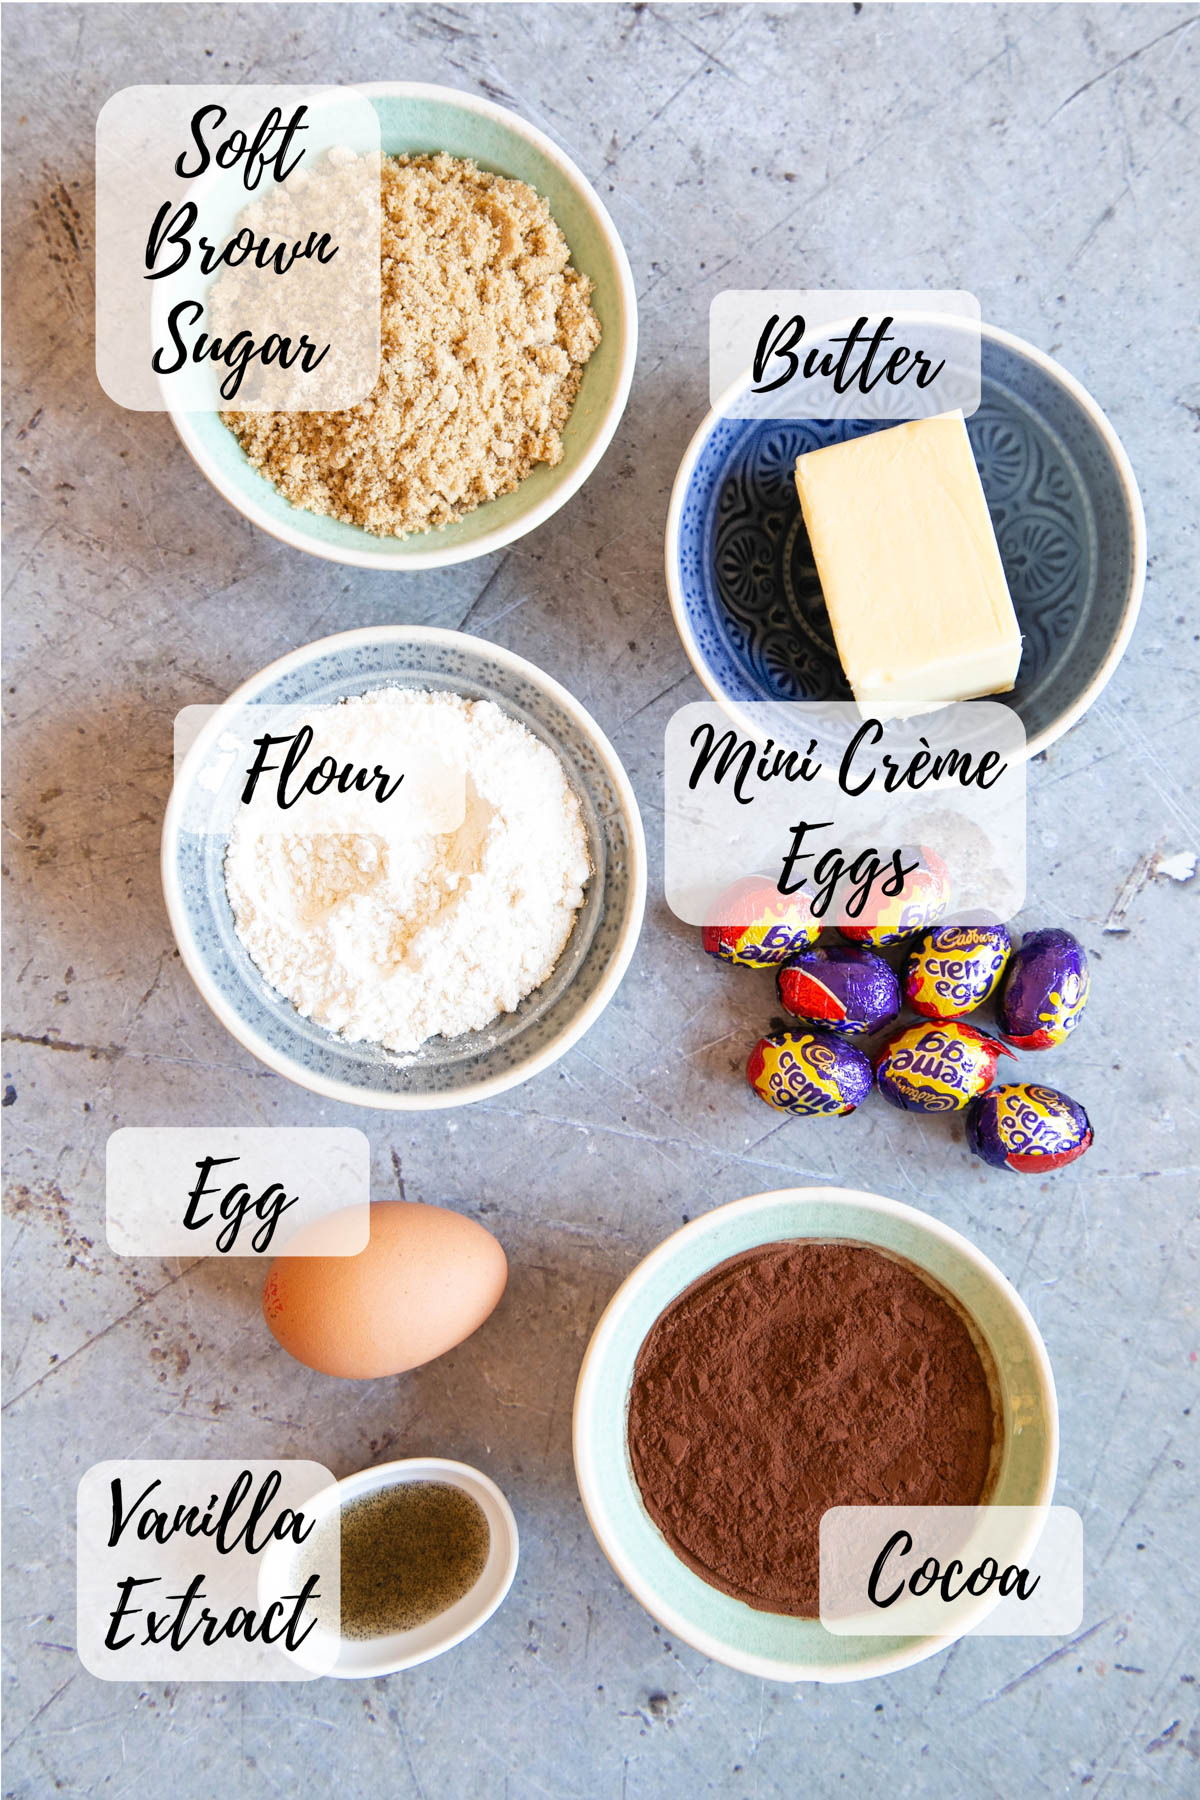 Ingredients for creme egg brownie recipe: soft brown sugar, butter, creme eggs, cocoa, vanilla extract, eg, flour